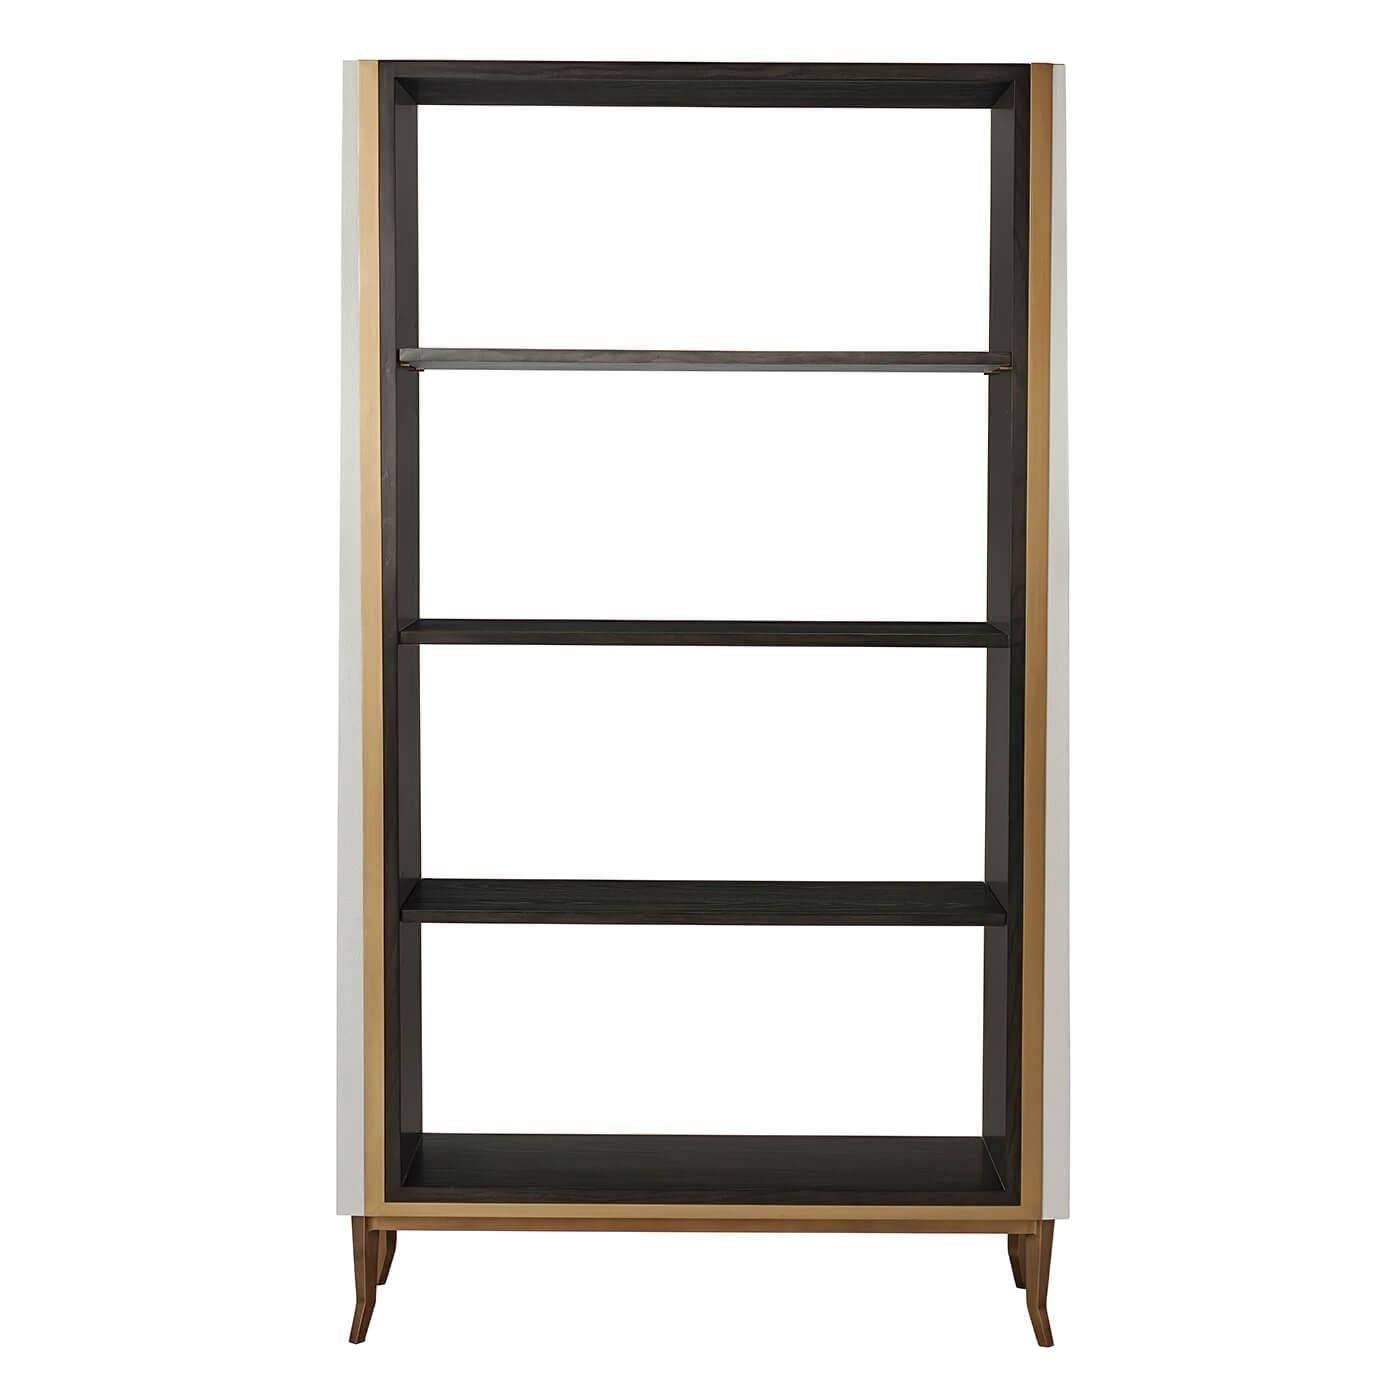 French Art Deco style open bookcase étagère with ash crown veneer, gilt three-quarter frame, with three shelves, (two adjustable) and tern finish shagreen embossed leather exterior panels.

Dimensions: 42